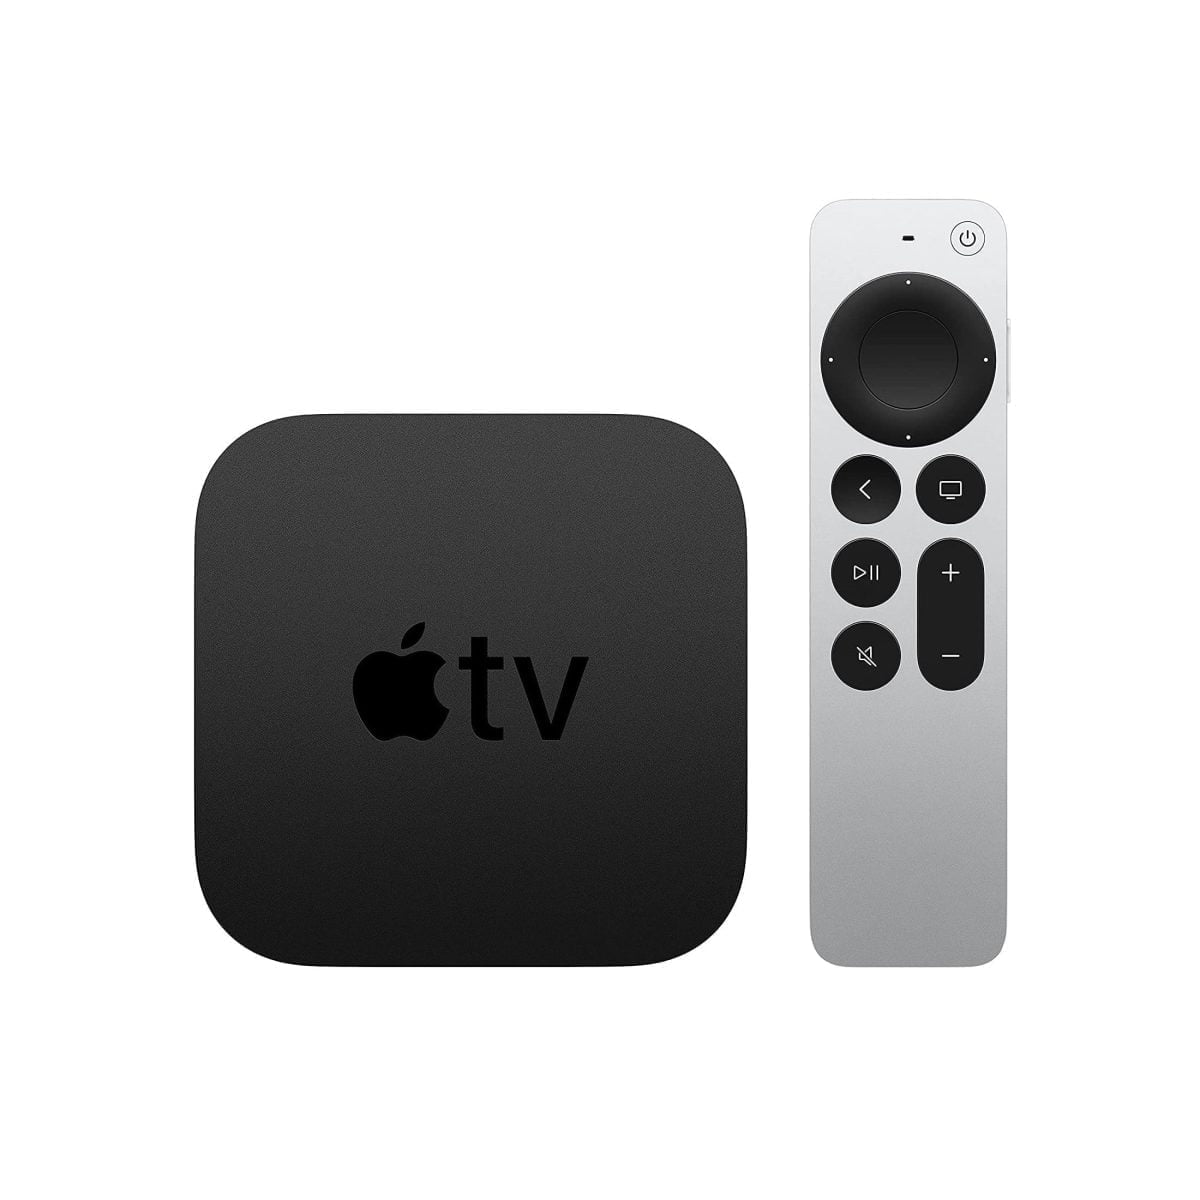 815G8Uo656S. Ac Sl1500 1 Apple &Lt;H1&Gt;Apple Tv 4K 32Gb (2Nd Generation) (Latest Model 2021) - Black&Lt;/H1&Gt; &Lt;Div Class=&Quot;Long-Description-Container Body-Copy &Quot;&Gt; &Lt;Div Class=&Quot;Html-Fragment&Quot;&Gt; &Lt;Div&Gt; &Lt;Div&Gt;The New Apple Tv 4K Brings The Best Shows, Movies, Sports, And Live Tv-Together With Your Favorite Apple Devices And Services. Now With 4K High Frame Rate Hdr For Fluid, Crisp Video. Watch Apple Originals With Apple Tv+. Experience More Ways To Enjoy Your Tv With Apple Arcade, Apple Fitness+, And Apple Music. And Use The New Siri Remote With Touch-Enabled Clickpad To Control It All.&Lt;/Div&Gt; &Lt;/Div&Gt; &Lt;/Div&Gt; &Lt;/Div&Gt; Apple Tv 4K 32Gb Apple Tv 4K 32Gb -2021- Black